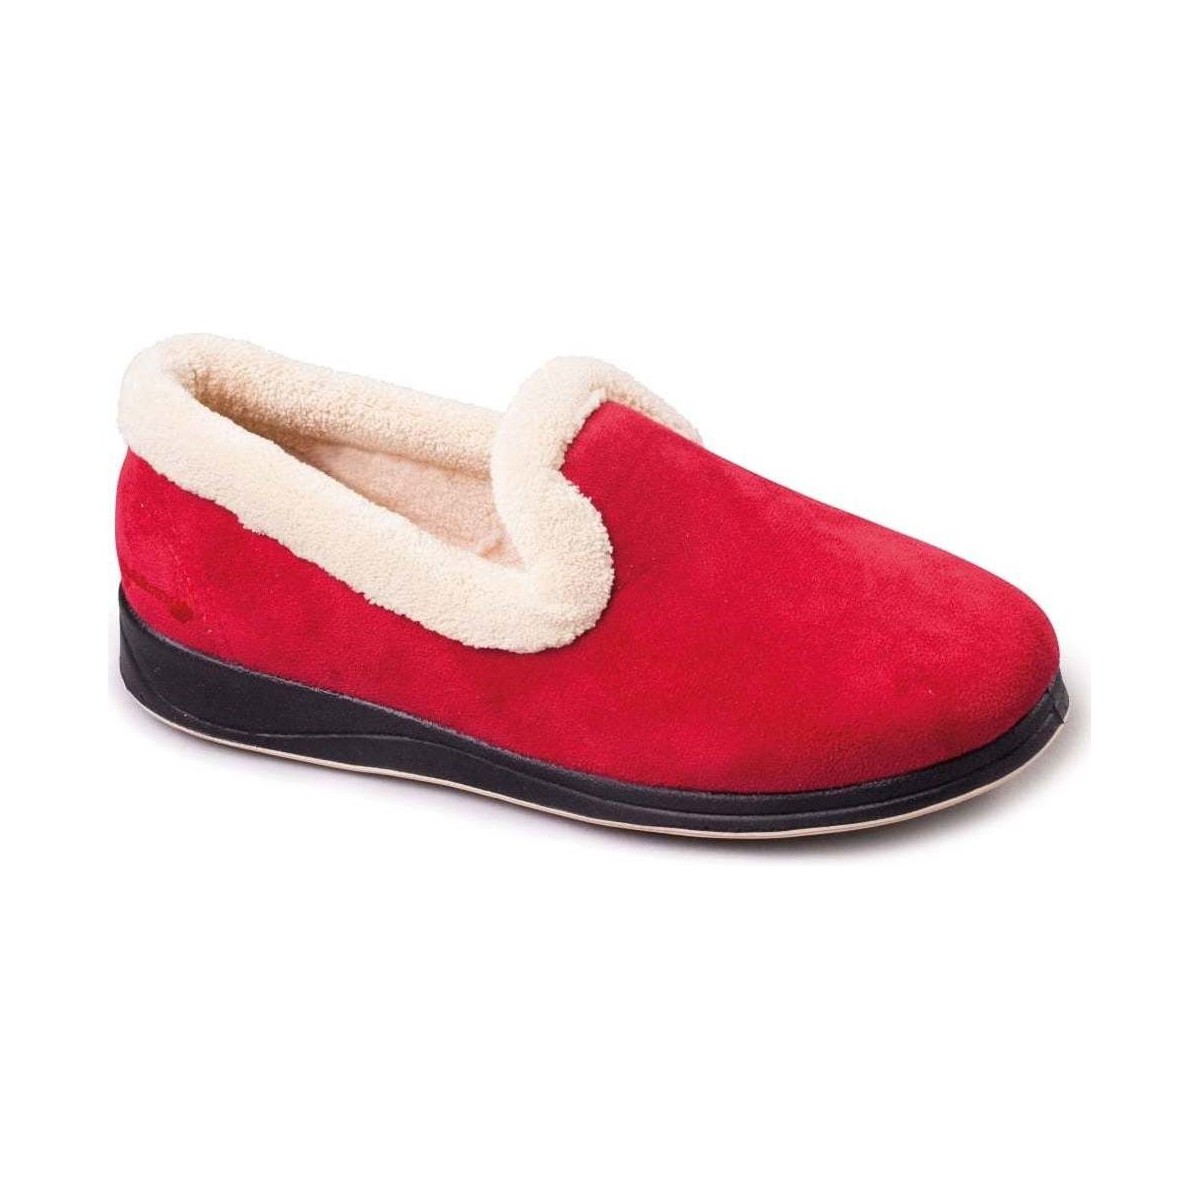 Shoes Women Slippers Padders Repose Womens Fully Lined Slippers Red